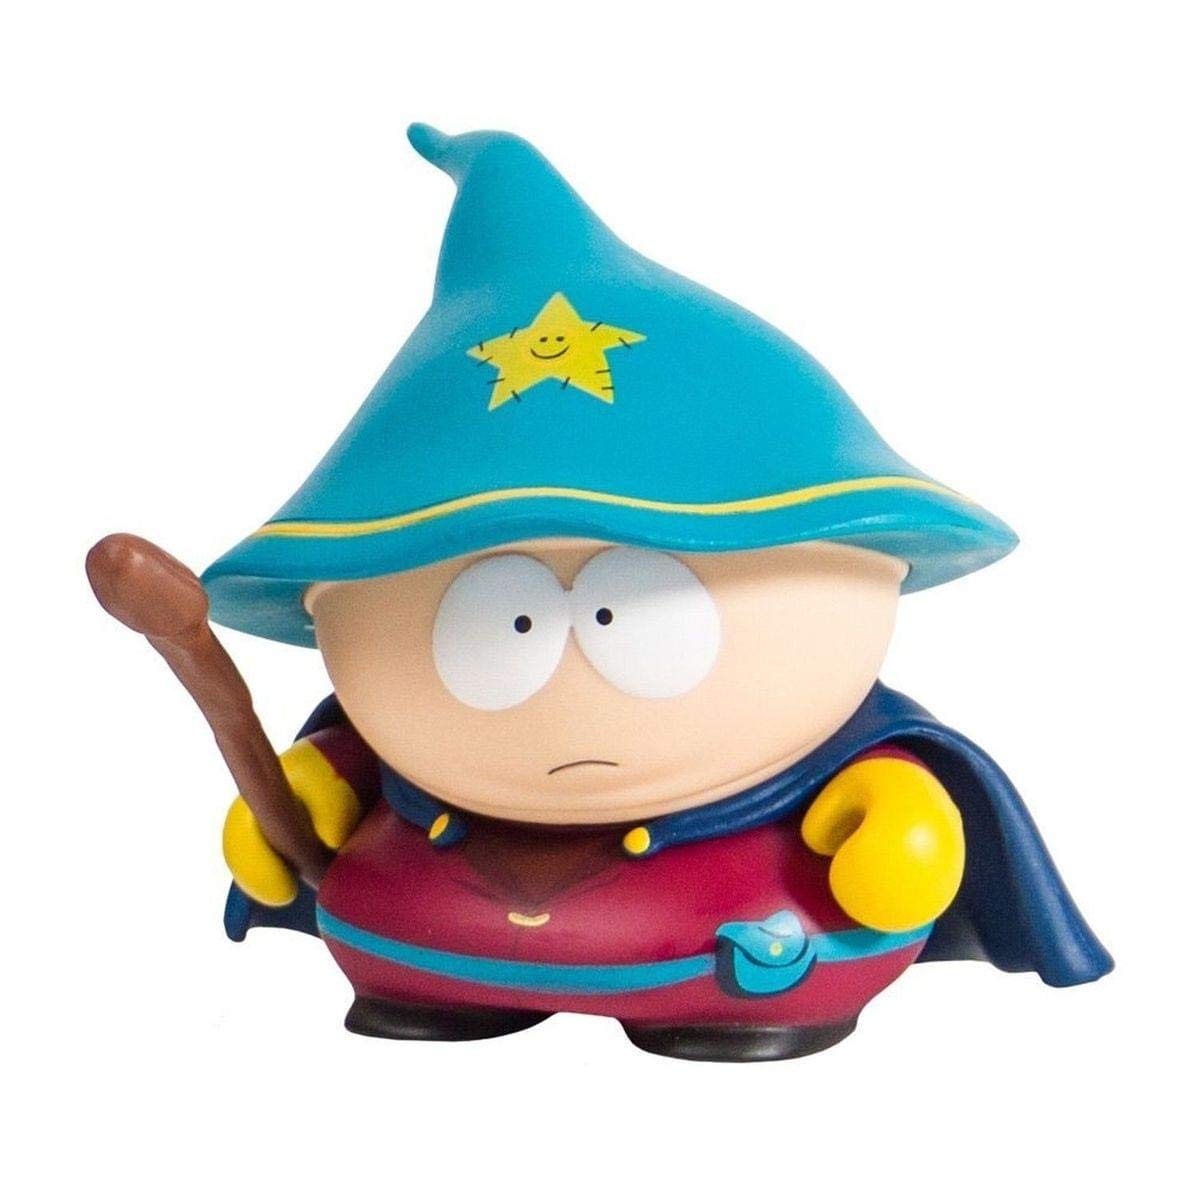 South Park The Stick of Truth: Cartman the Grand Wizard